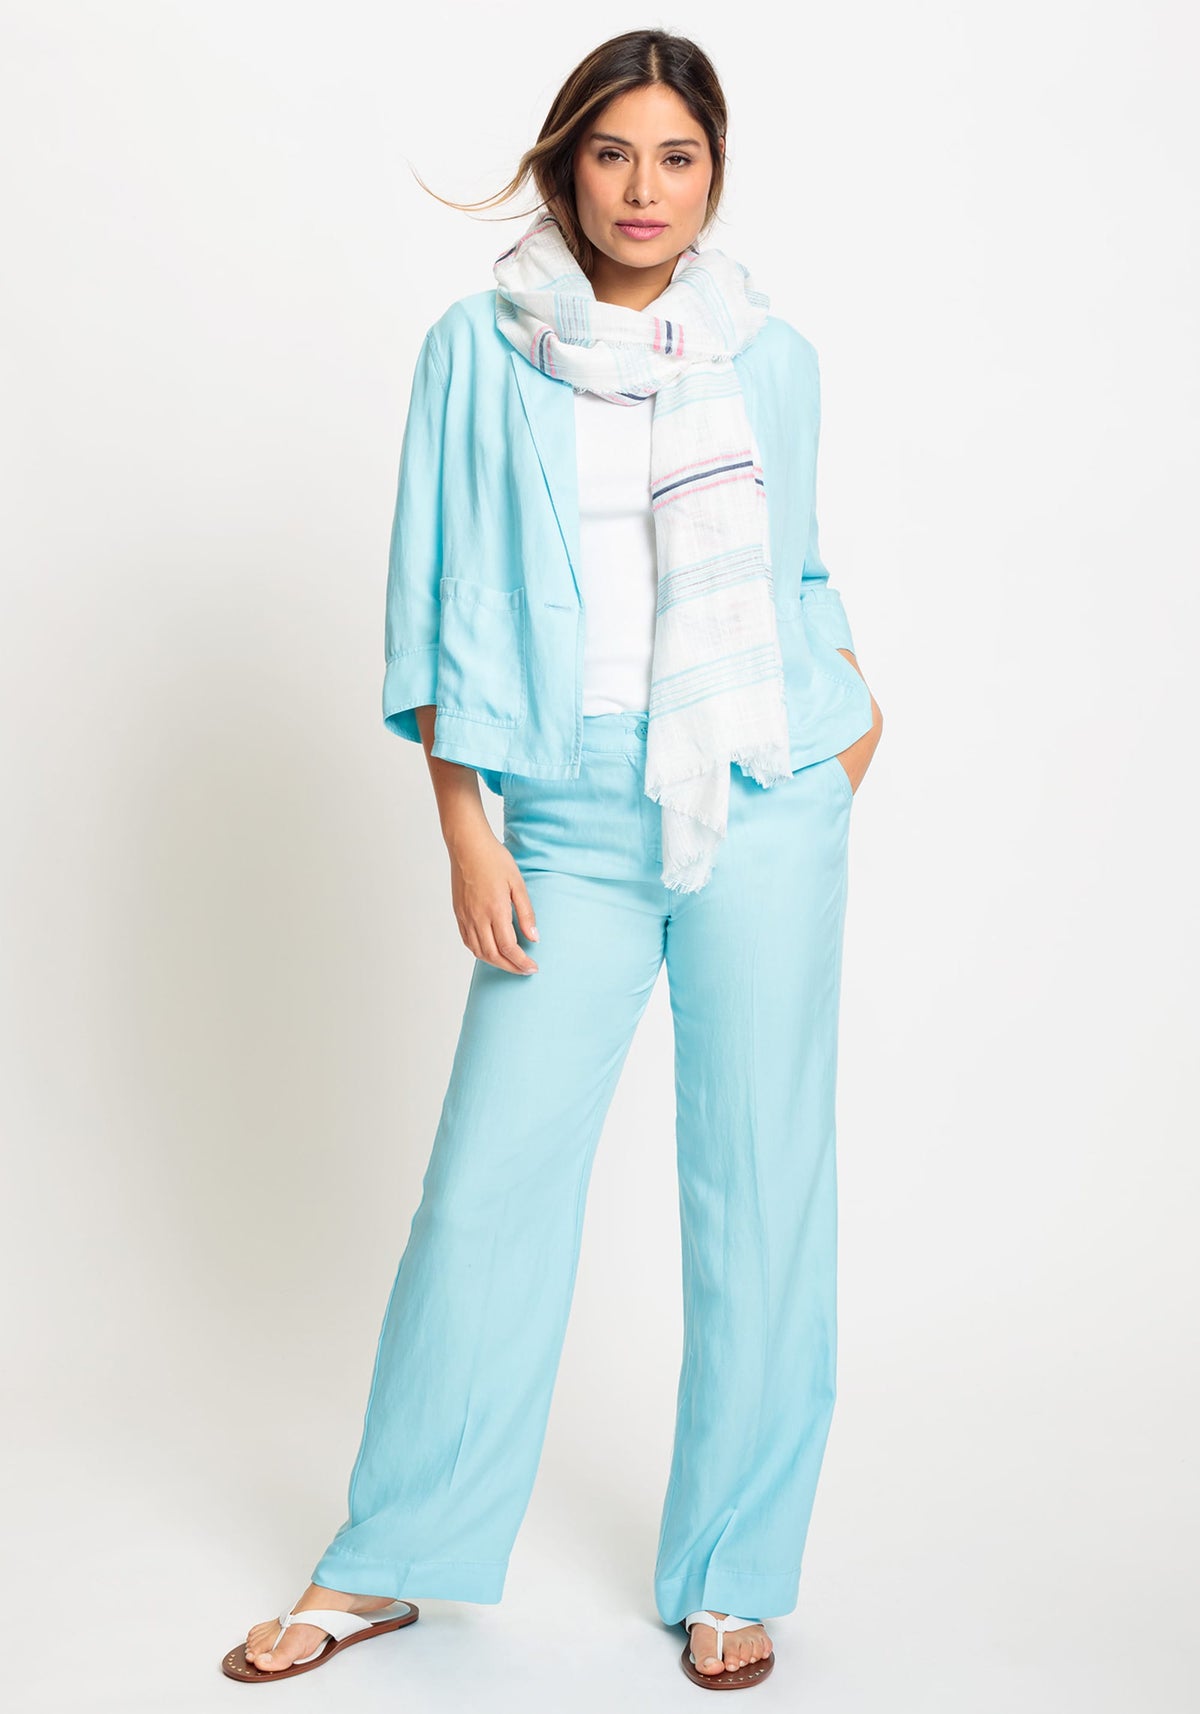 Anna Fit Wide Leg Trouser containing TENCEL™ Lyocell